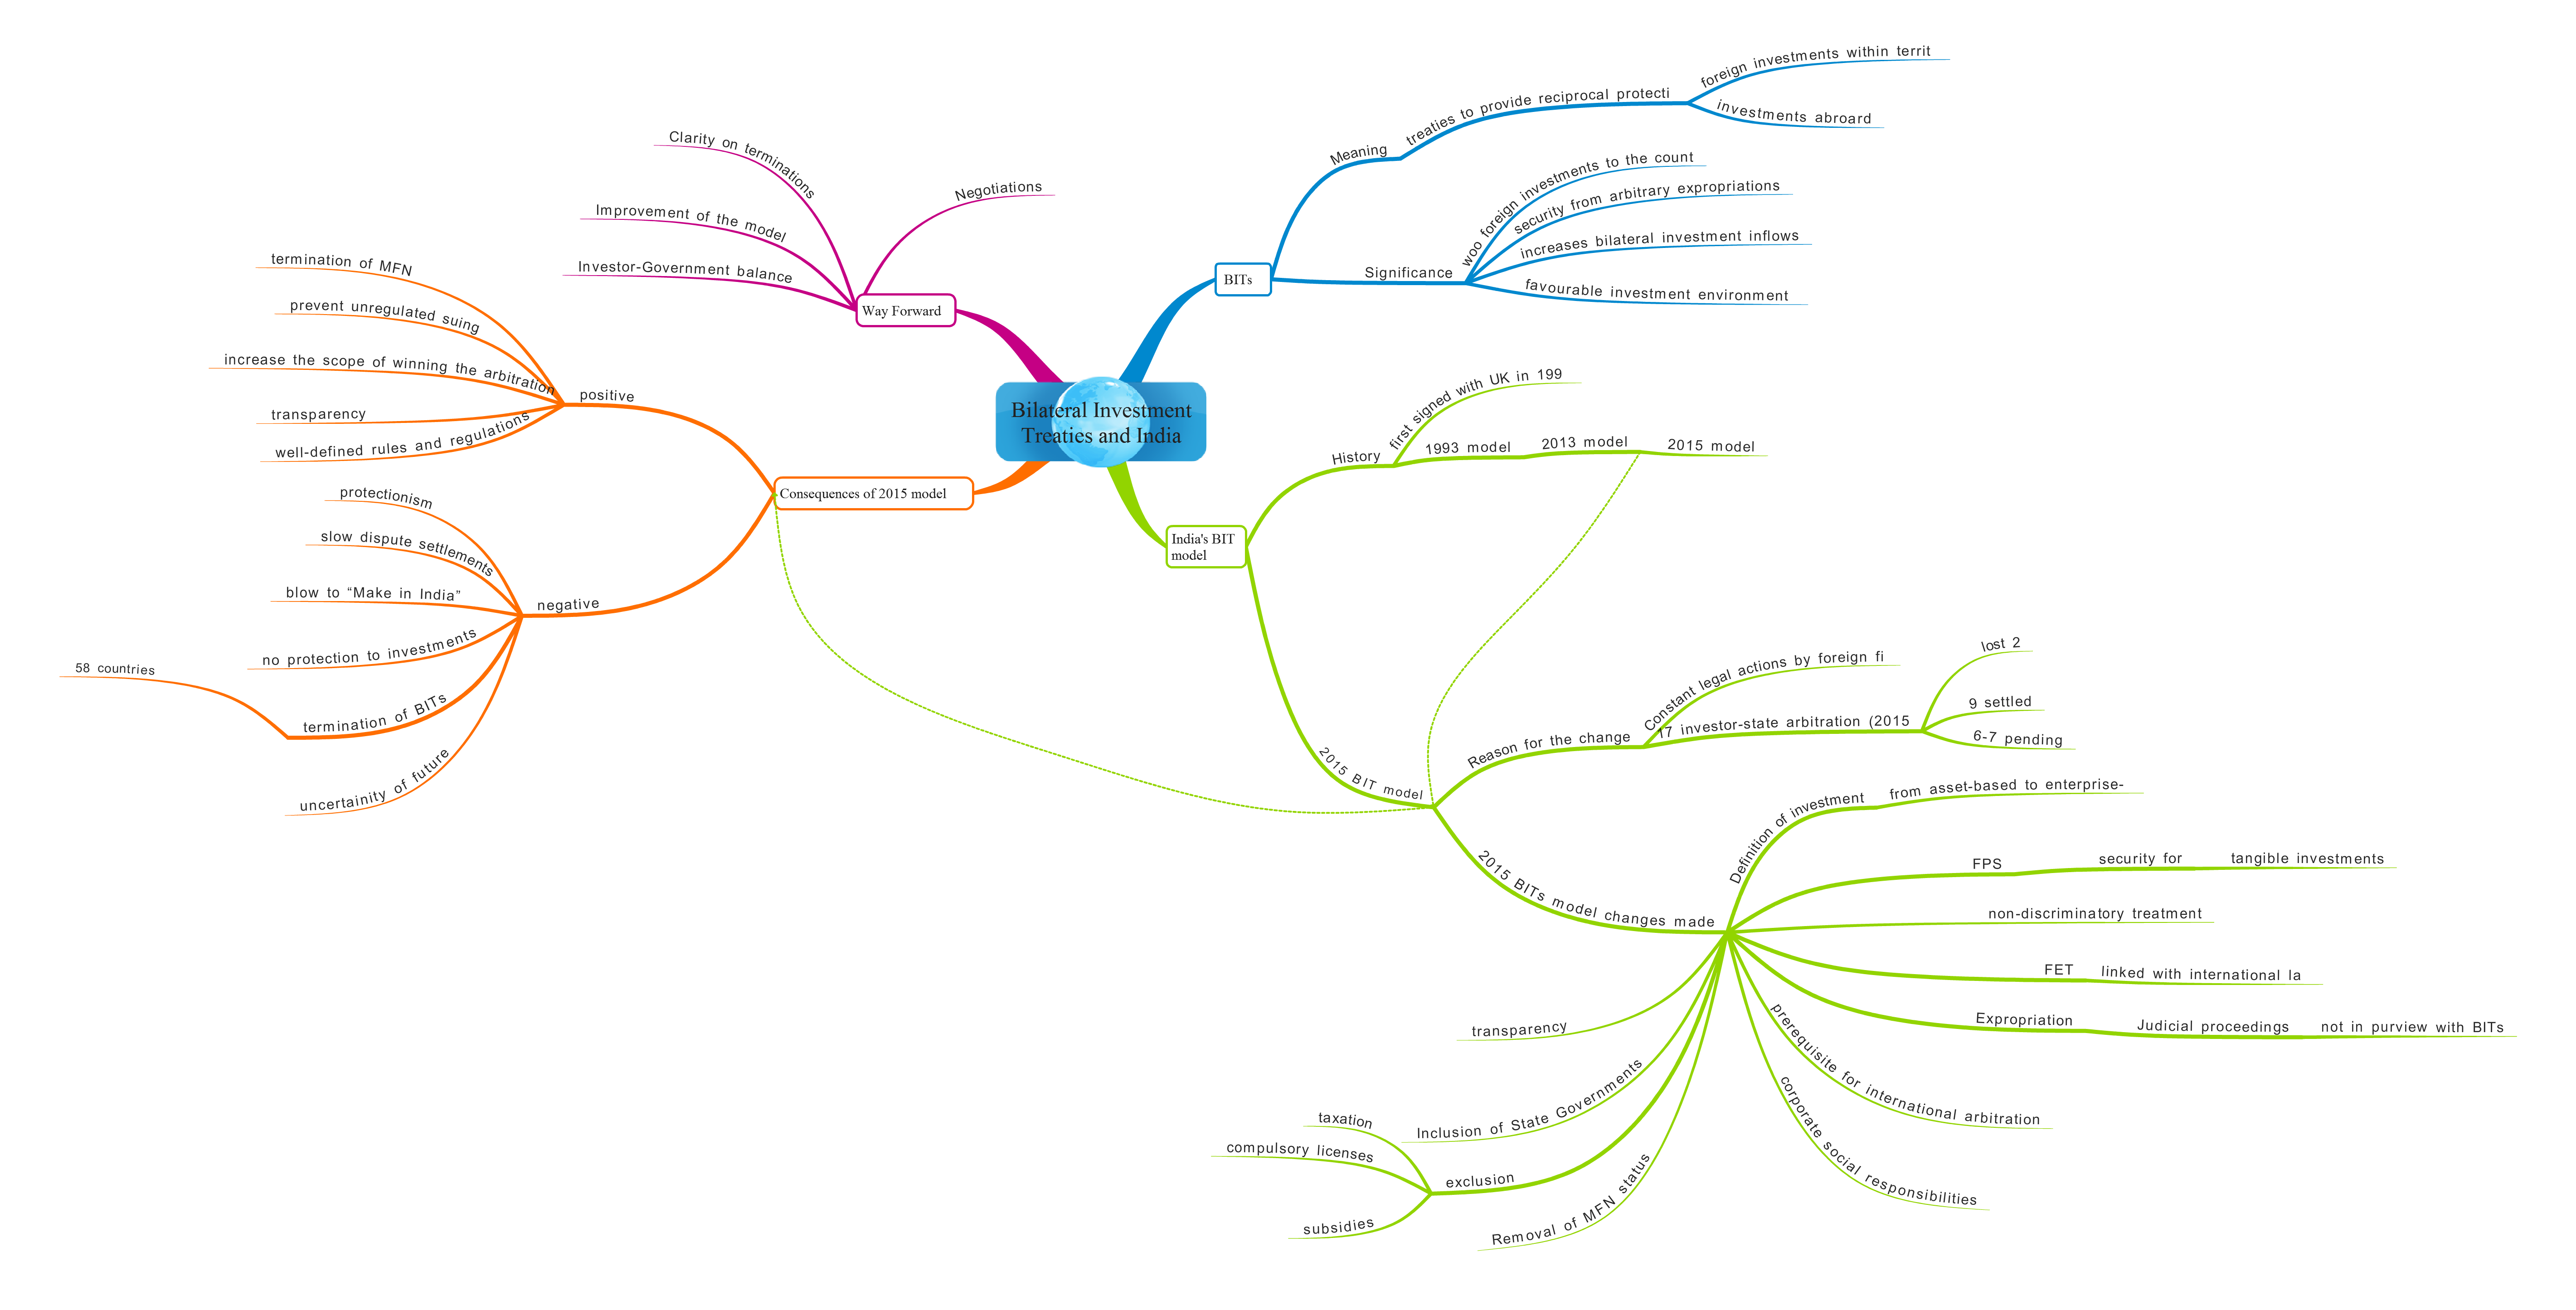 India's Bilateral Investment Treaties (BIT) overview upsc ias notes essay mindmap